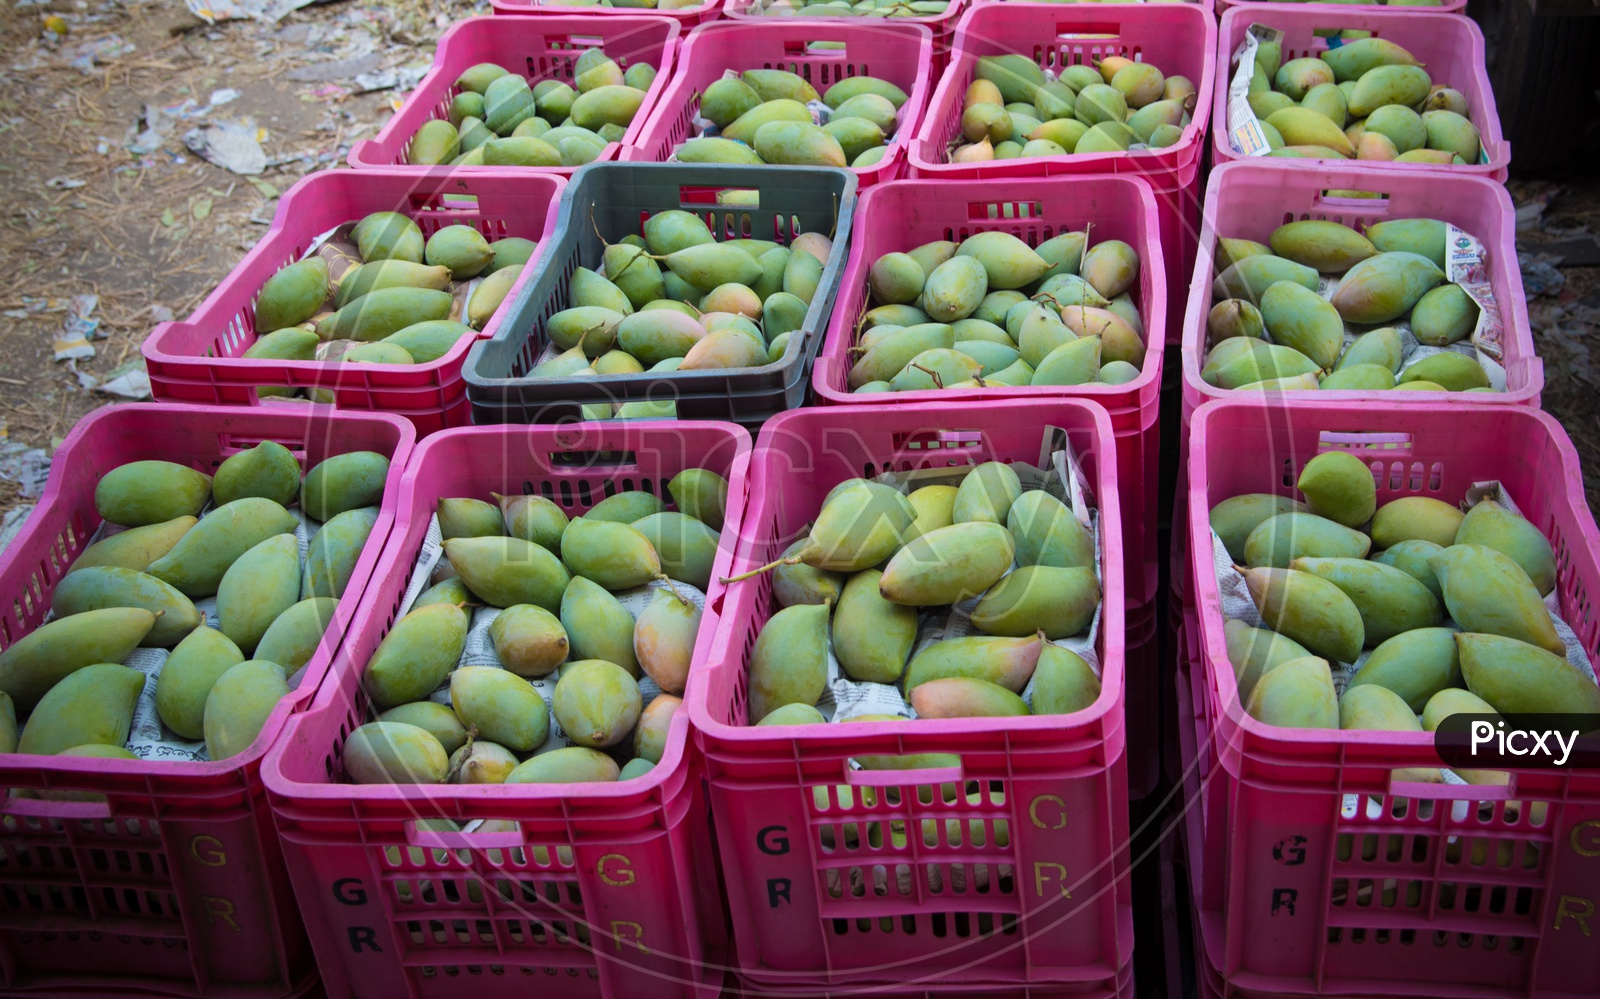 Mangoes in crates for sale